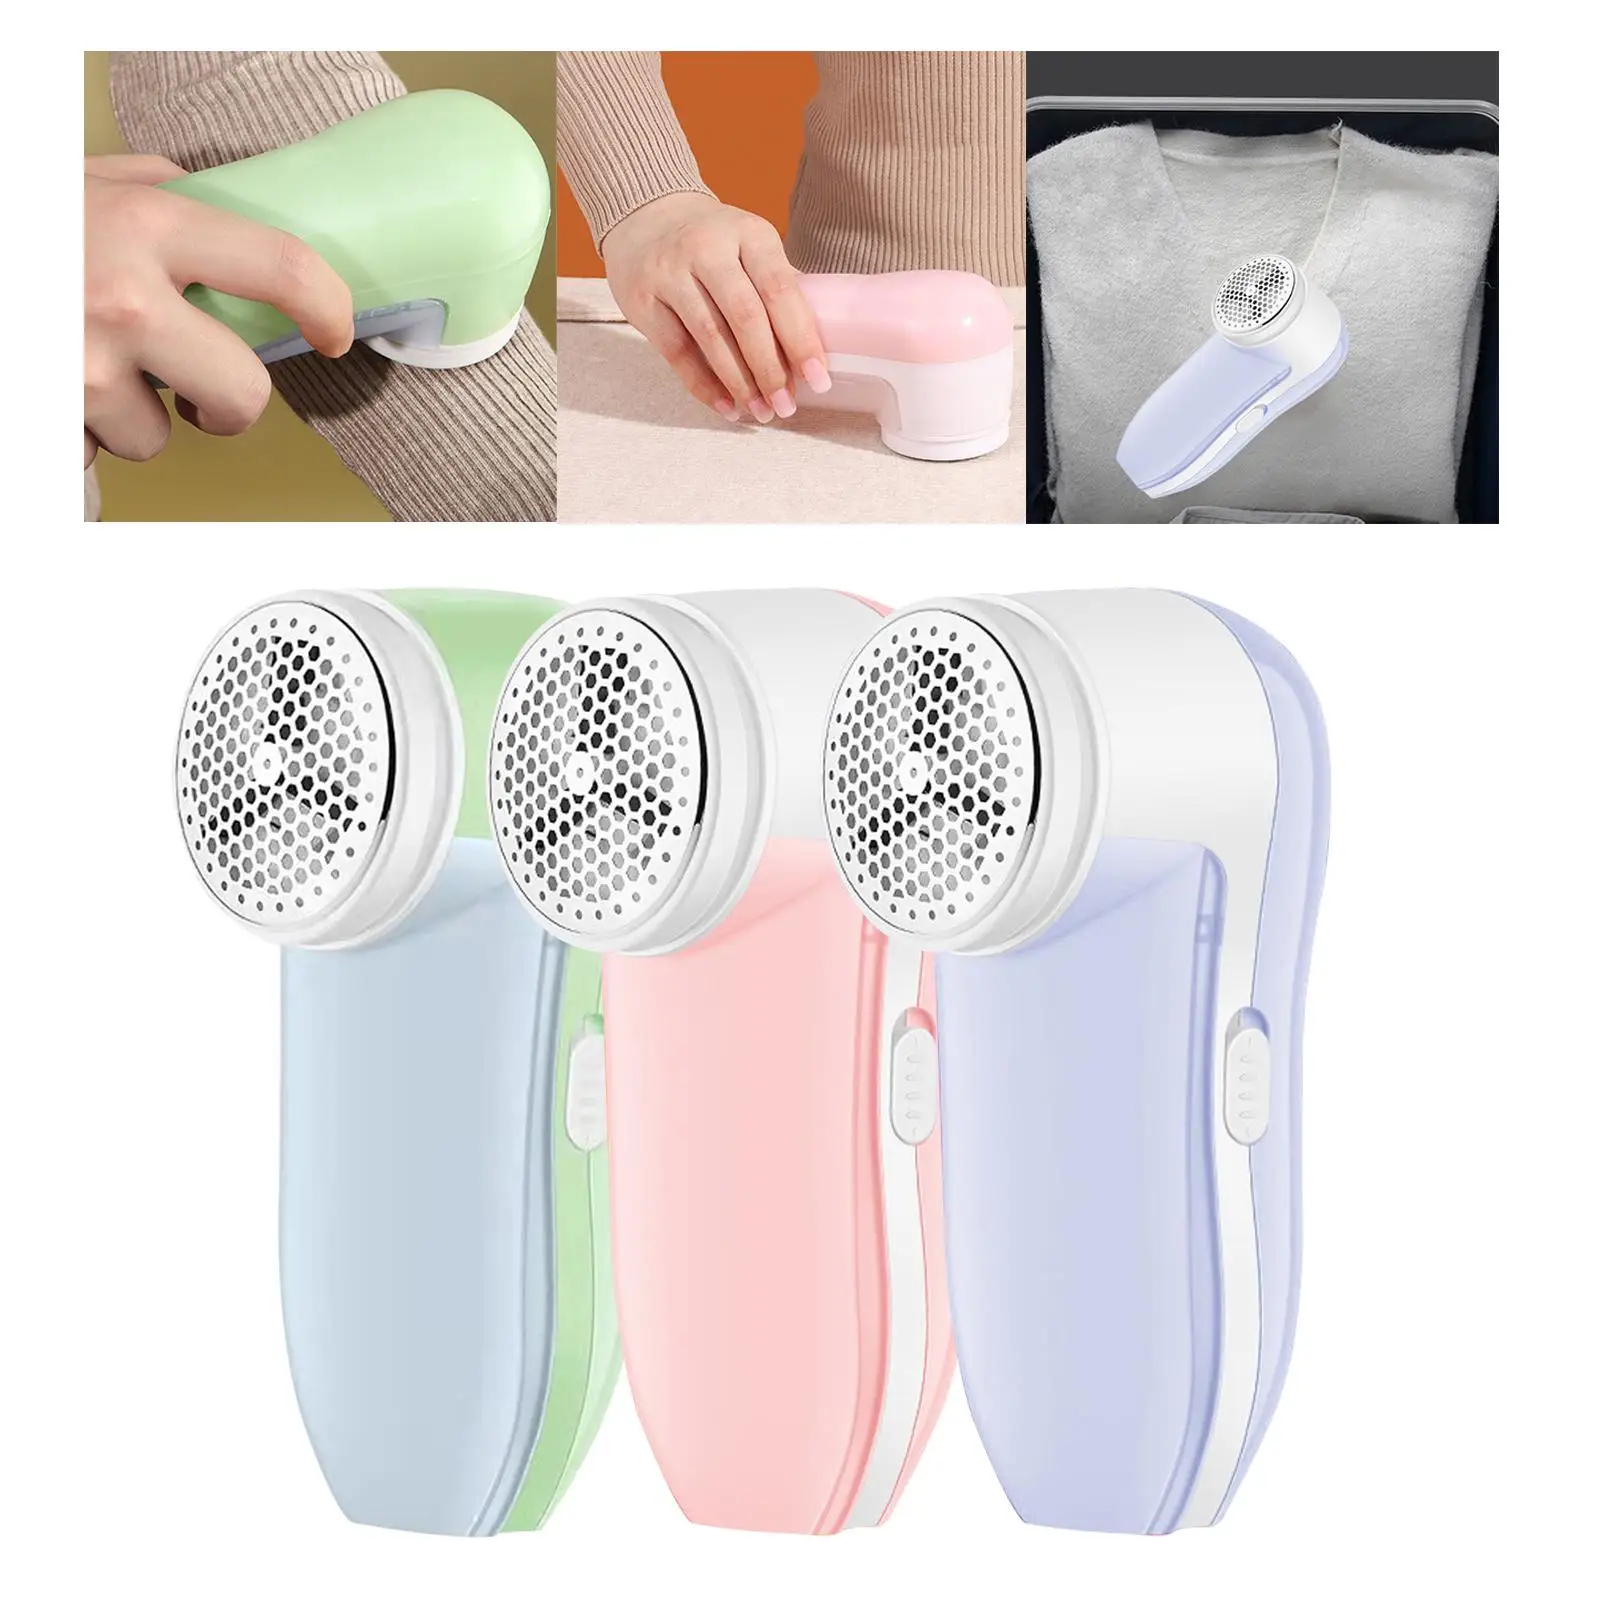 Fabric Shaver Pill Remover Trimmer Remove USB for Blanket Cotton Cashmere